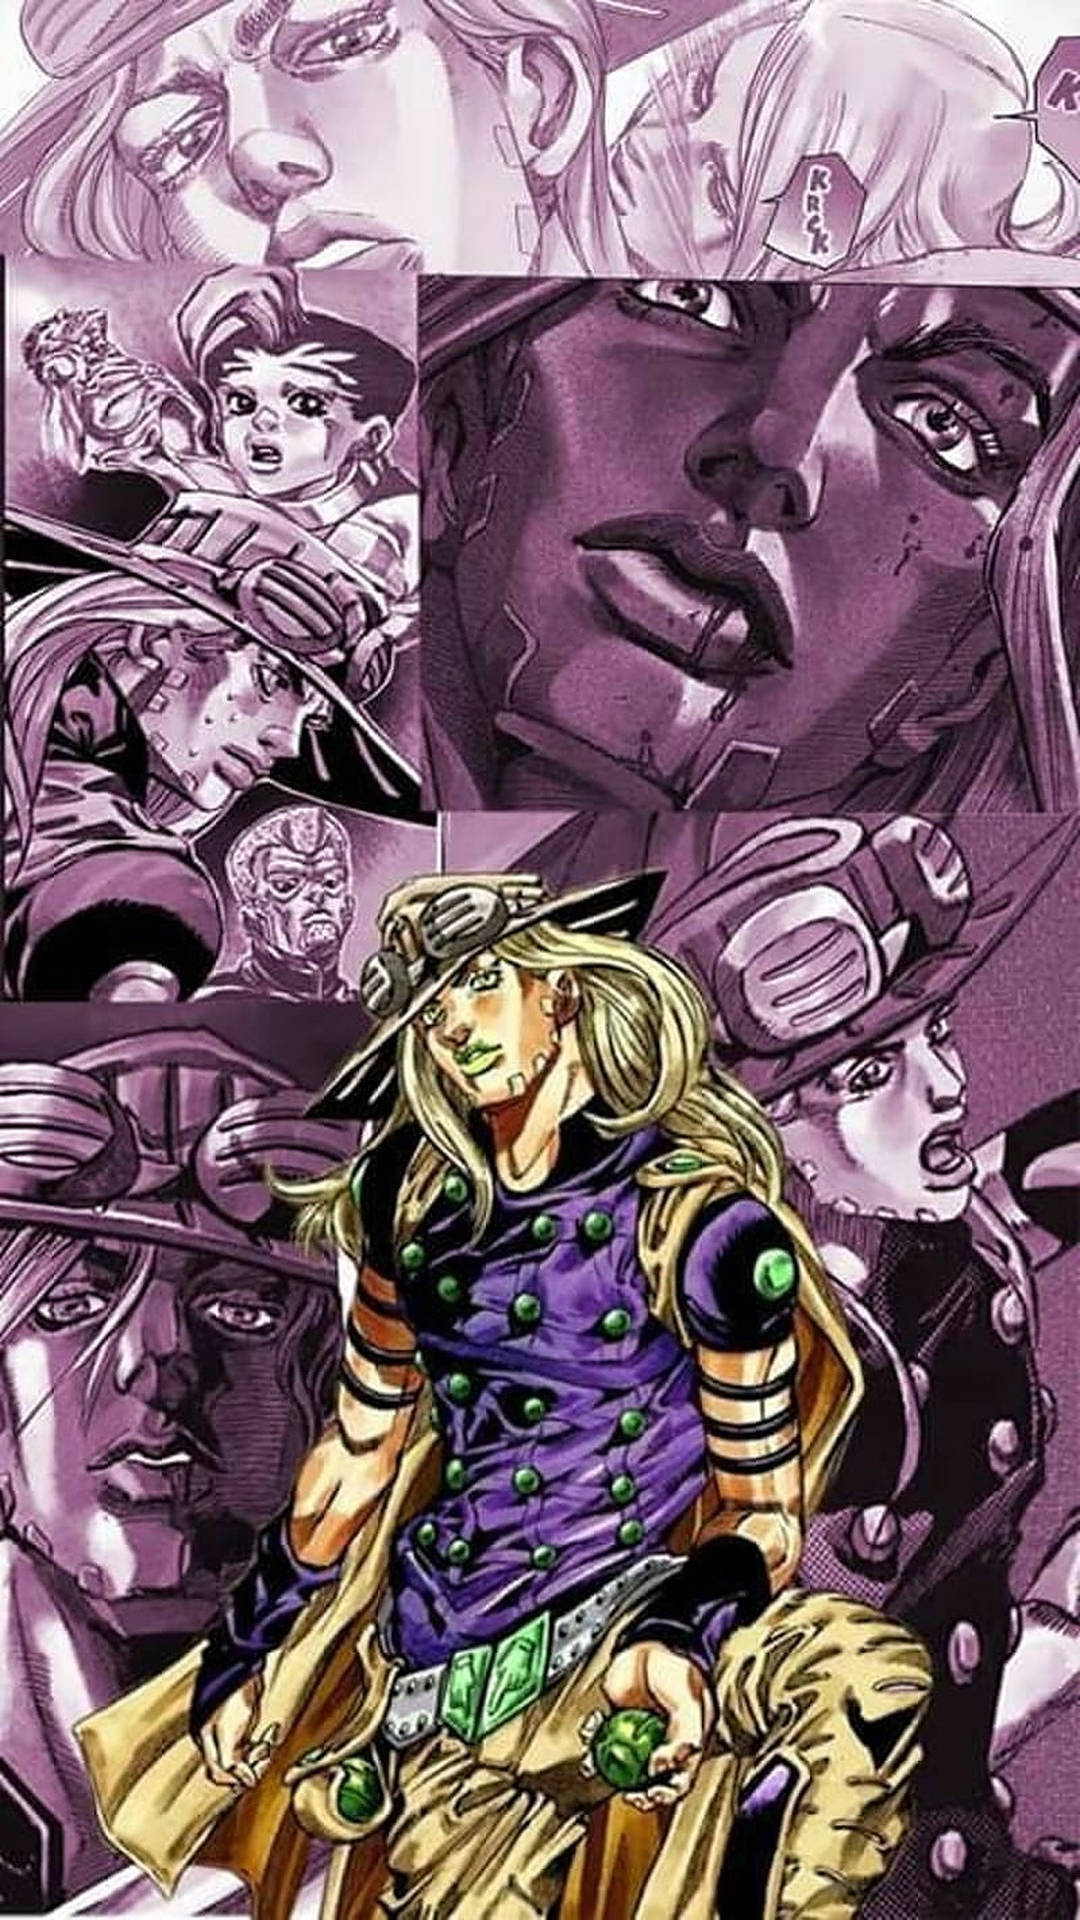 10 Gyro Zeppeli HD Wallpapers and Backgrounds